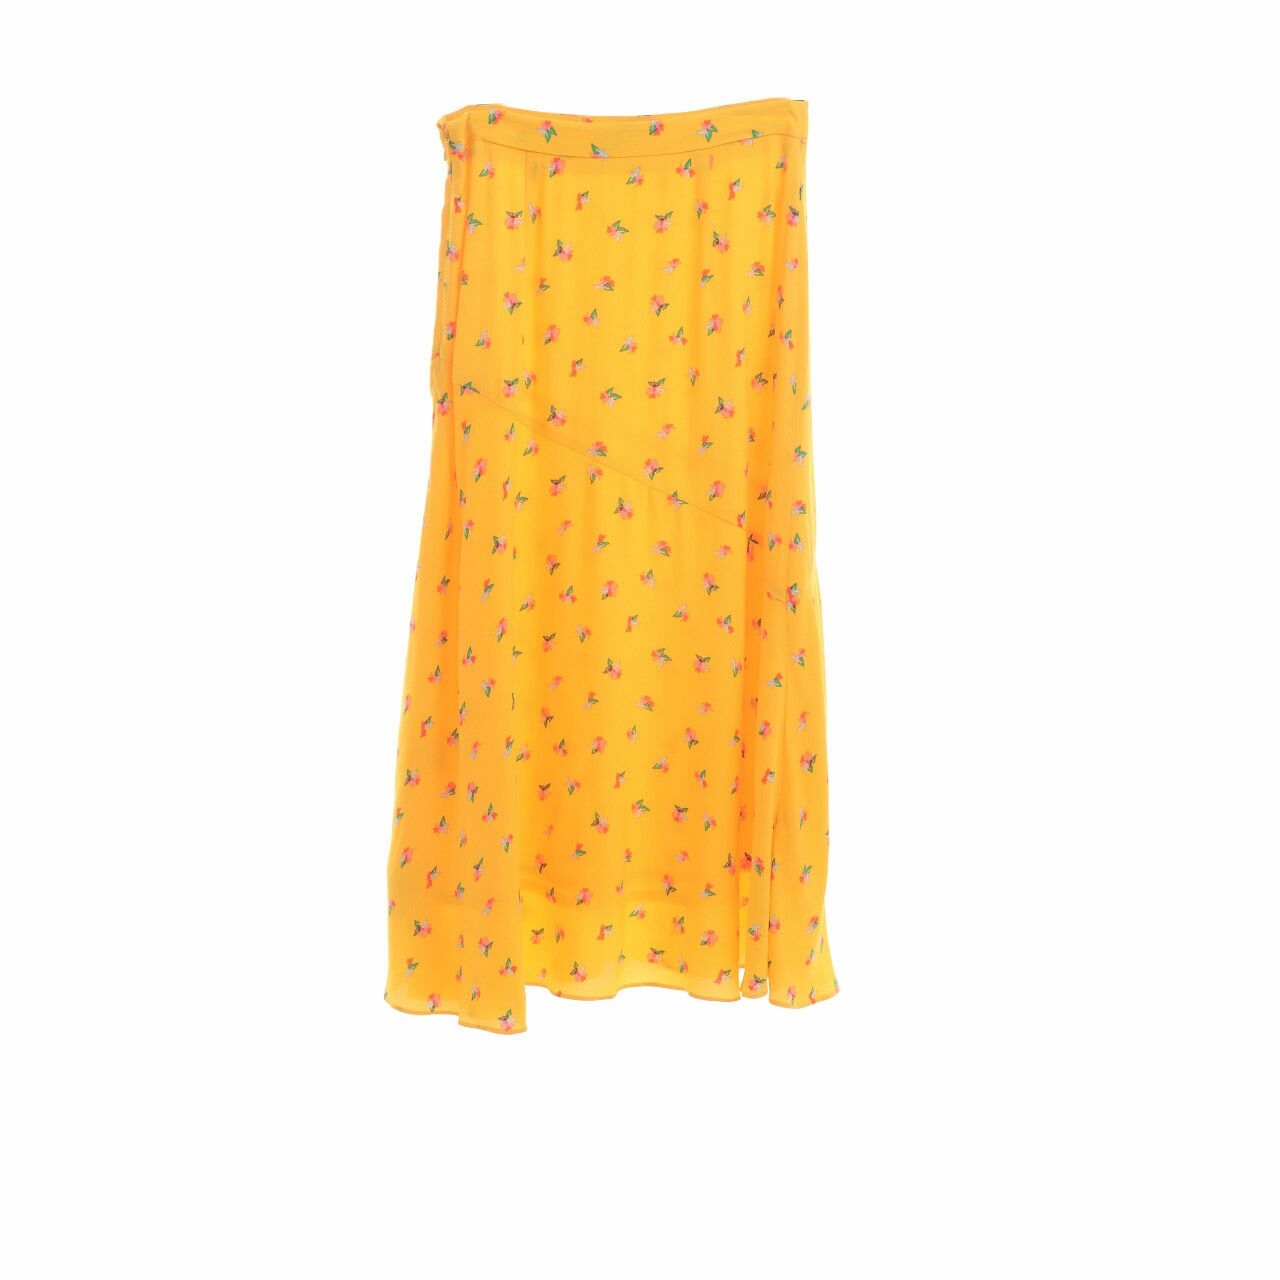 & Other Stories Yellow Floral Midi Skirt